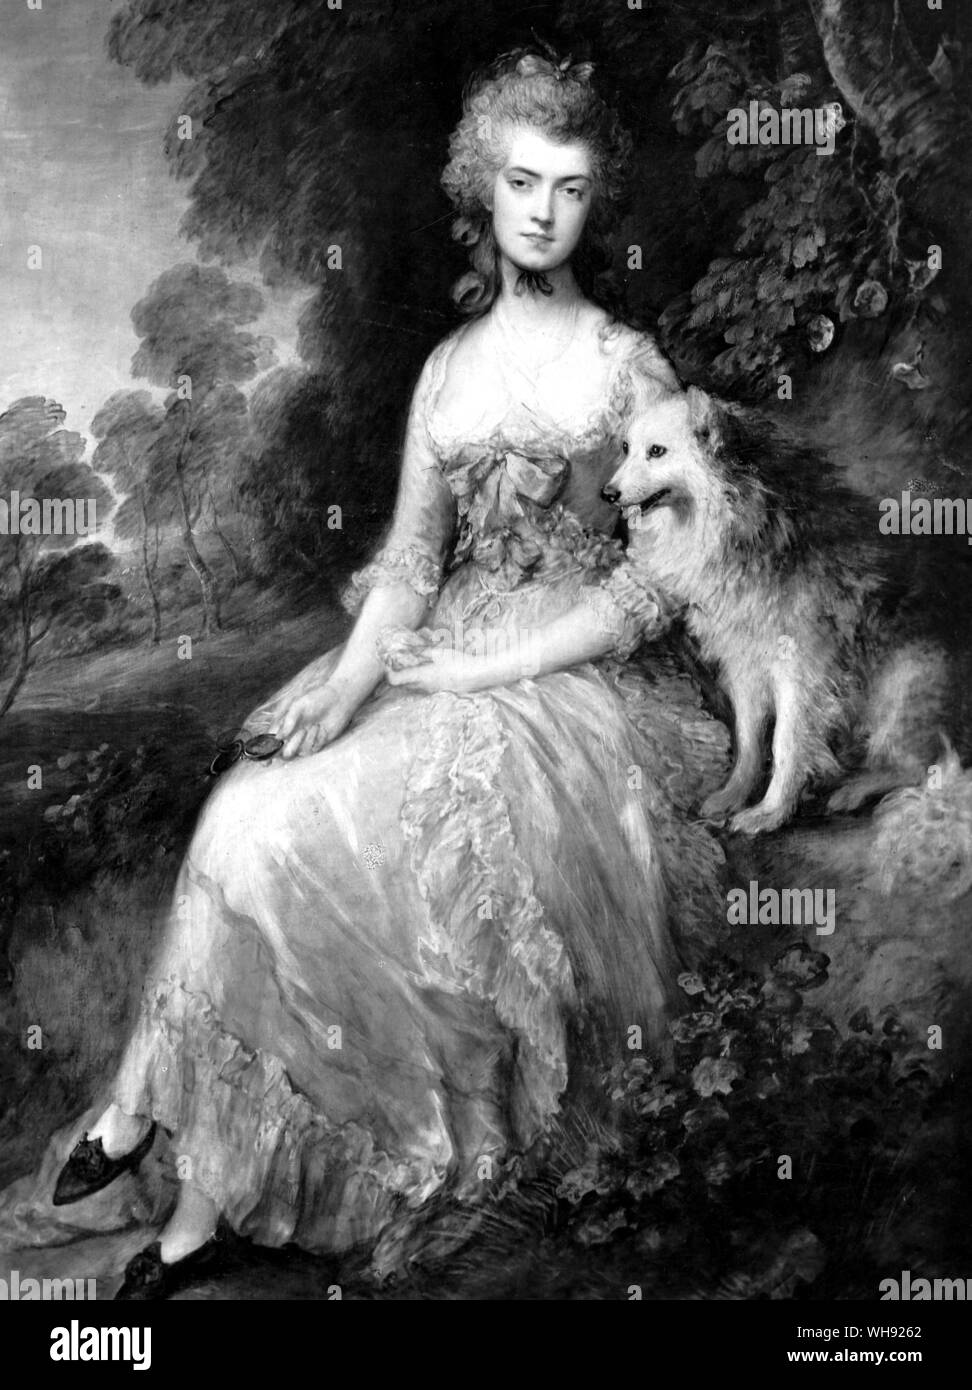 Mrs Robinson, English actress, novelist and poet (1758-1800), Perdita, 1781. By Thomas Gainsborough (1727-88). English society painter of portraits and landscapes. Stock Photo